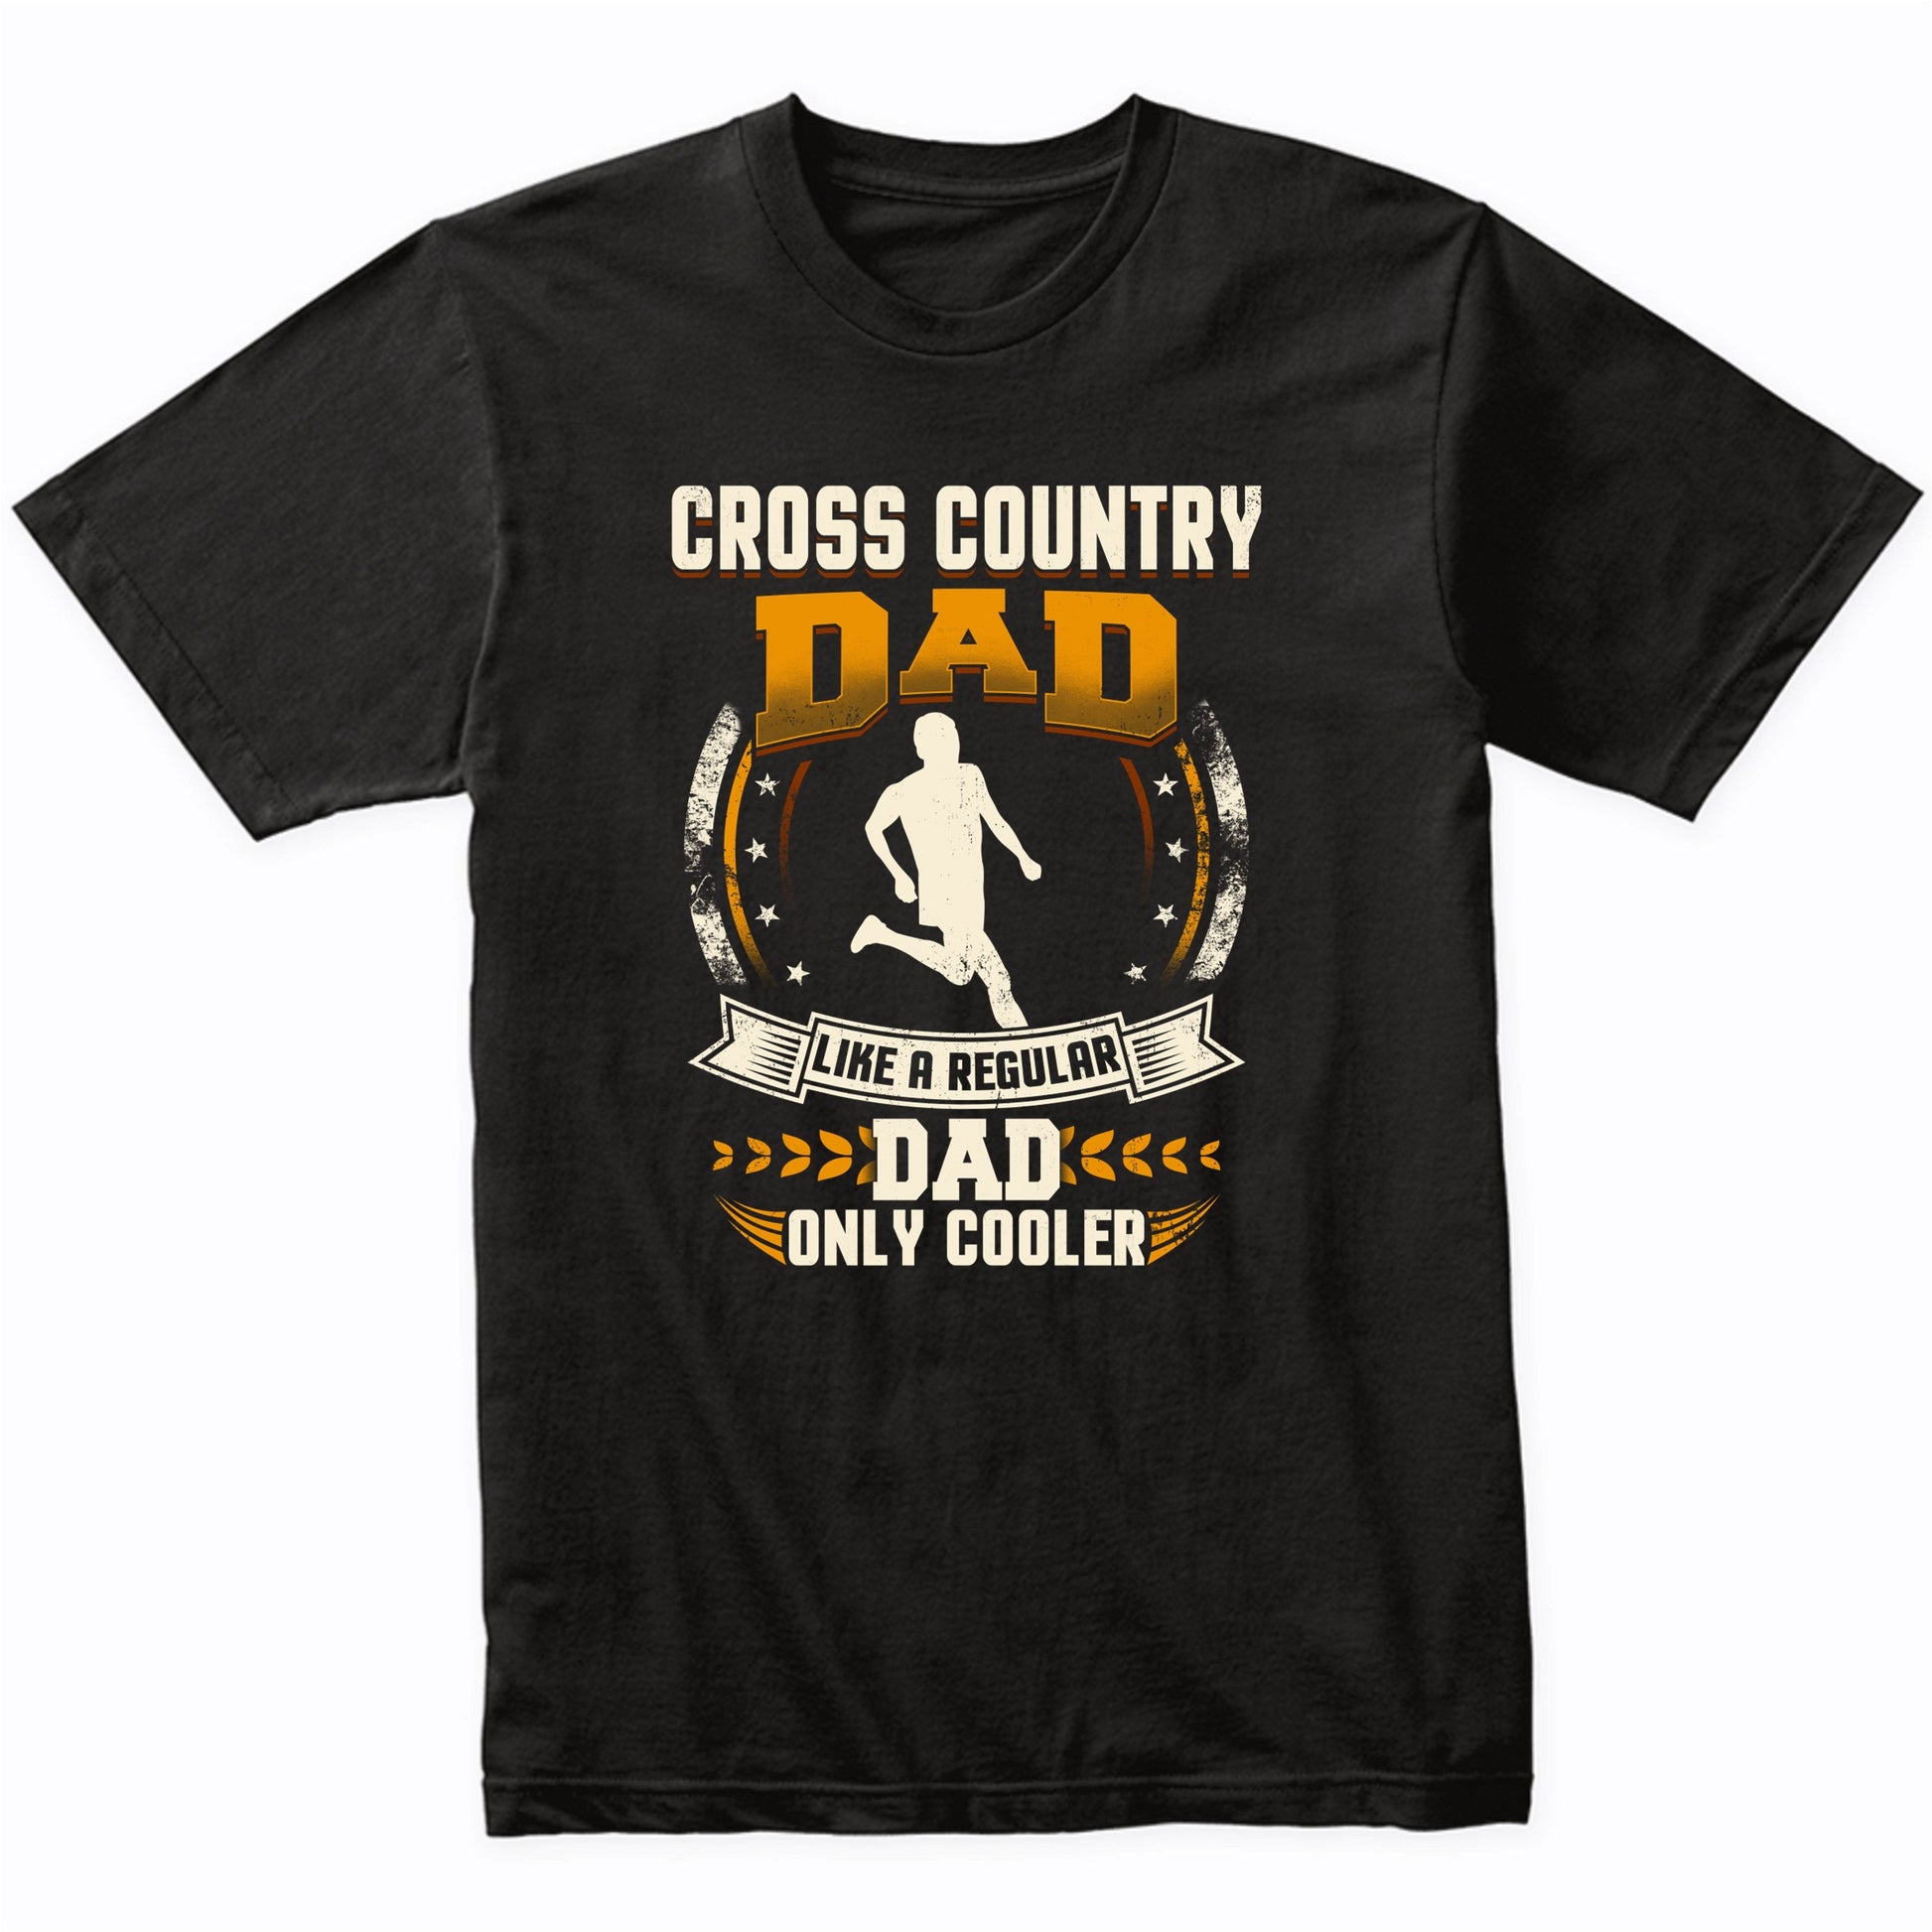 Cross Country Dad Like A Regular Dad Only Cooler Funny T-Shirt